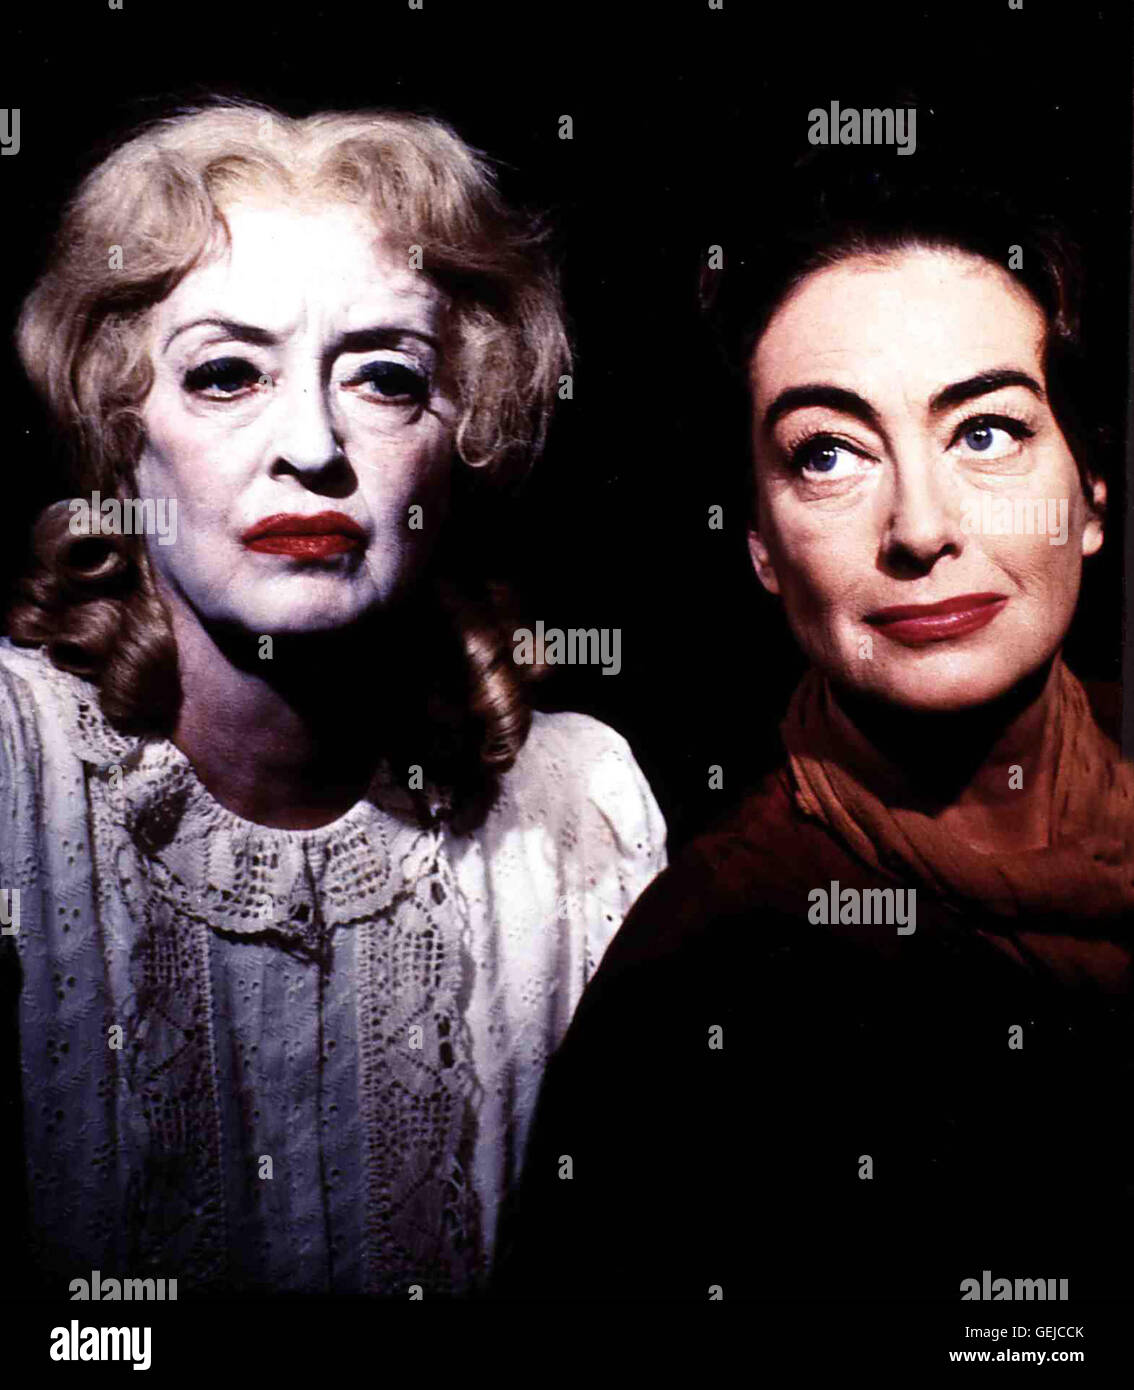 Bette And Joan High Resolution Stock Photography and Images - Alamy